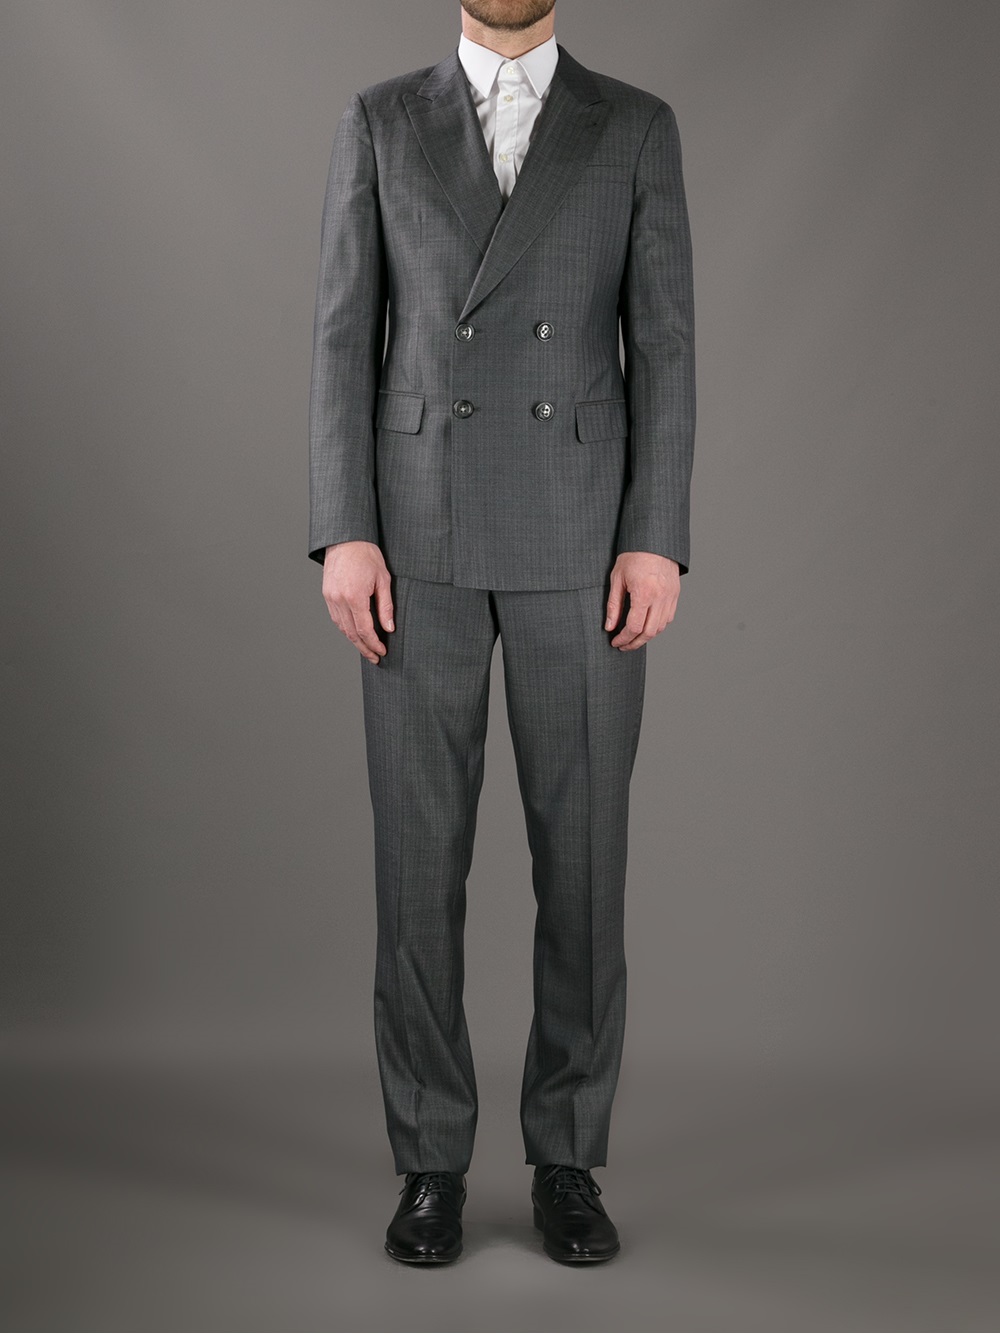 Giorgio Armani Pinstripe Double Breasted Suit in Grey (Gray) for Men - Lyst